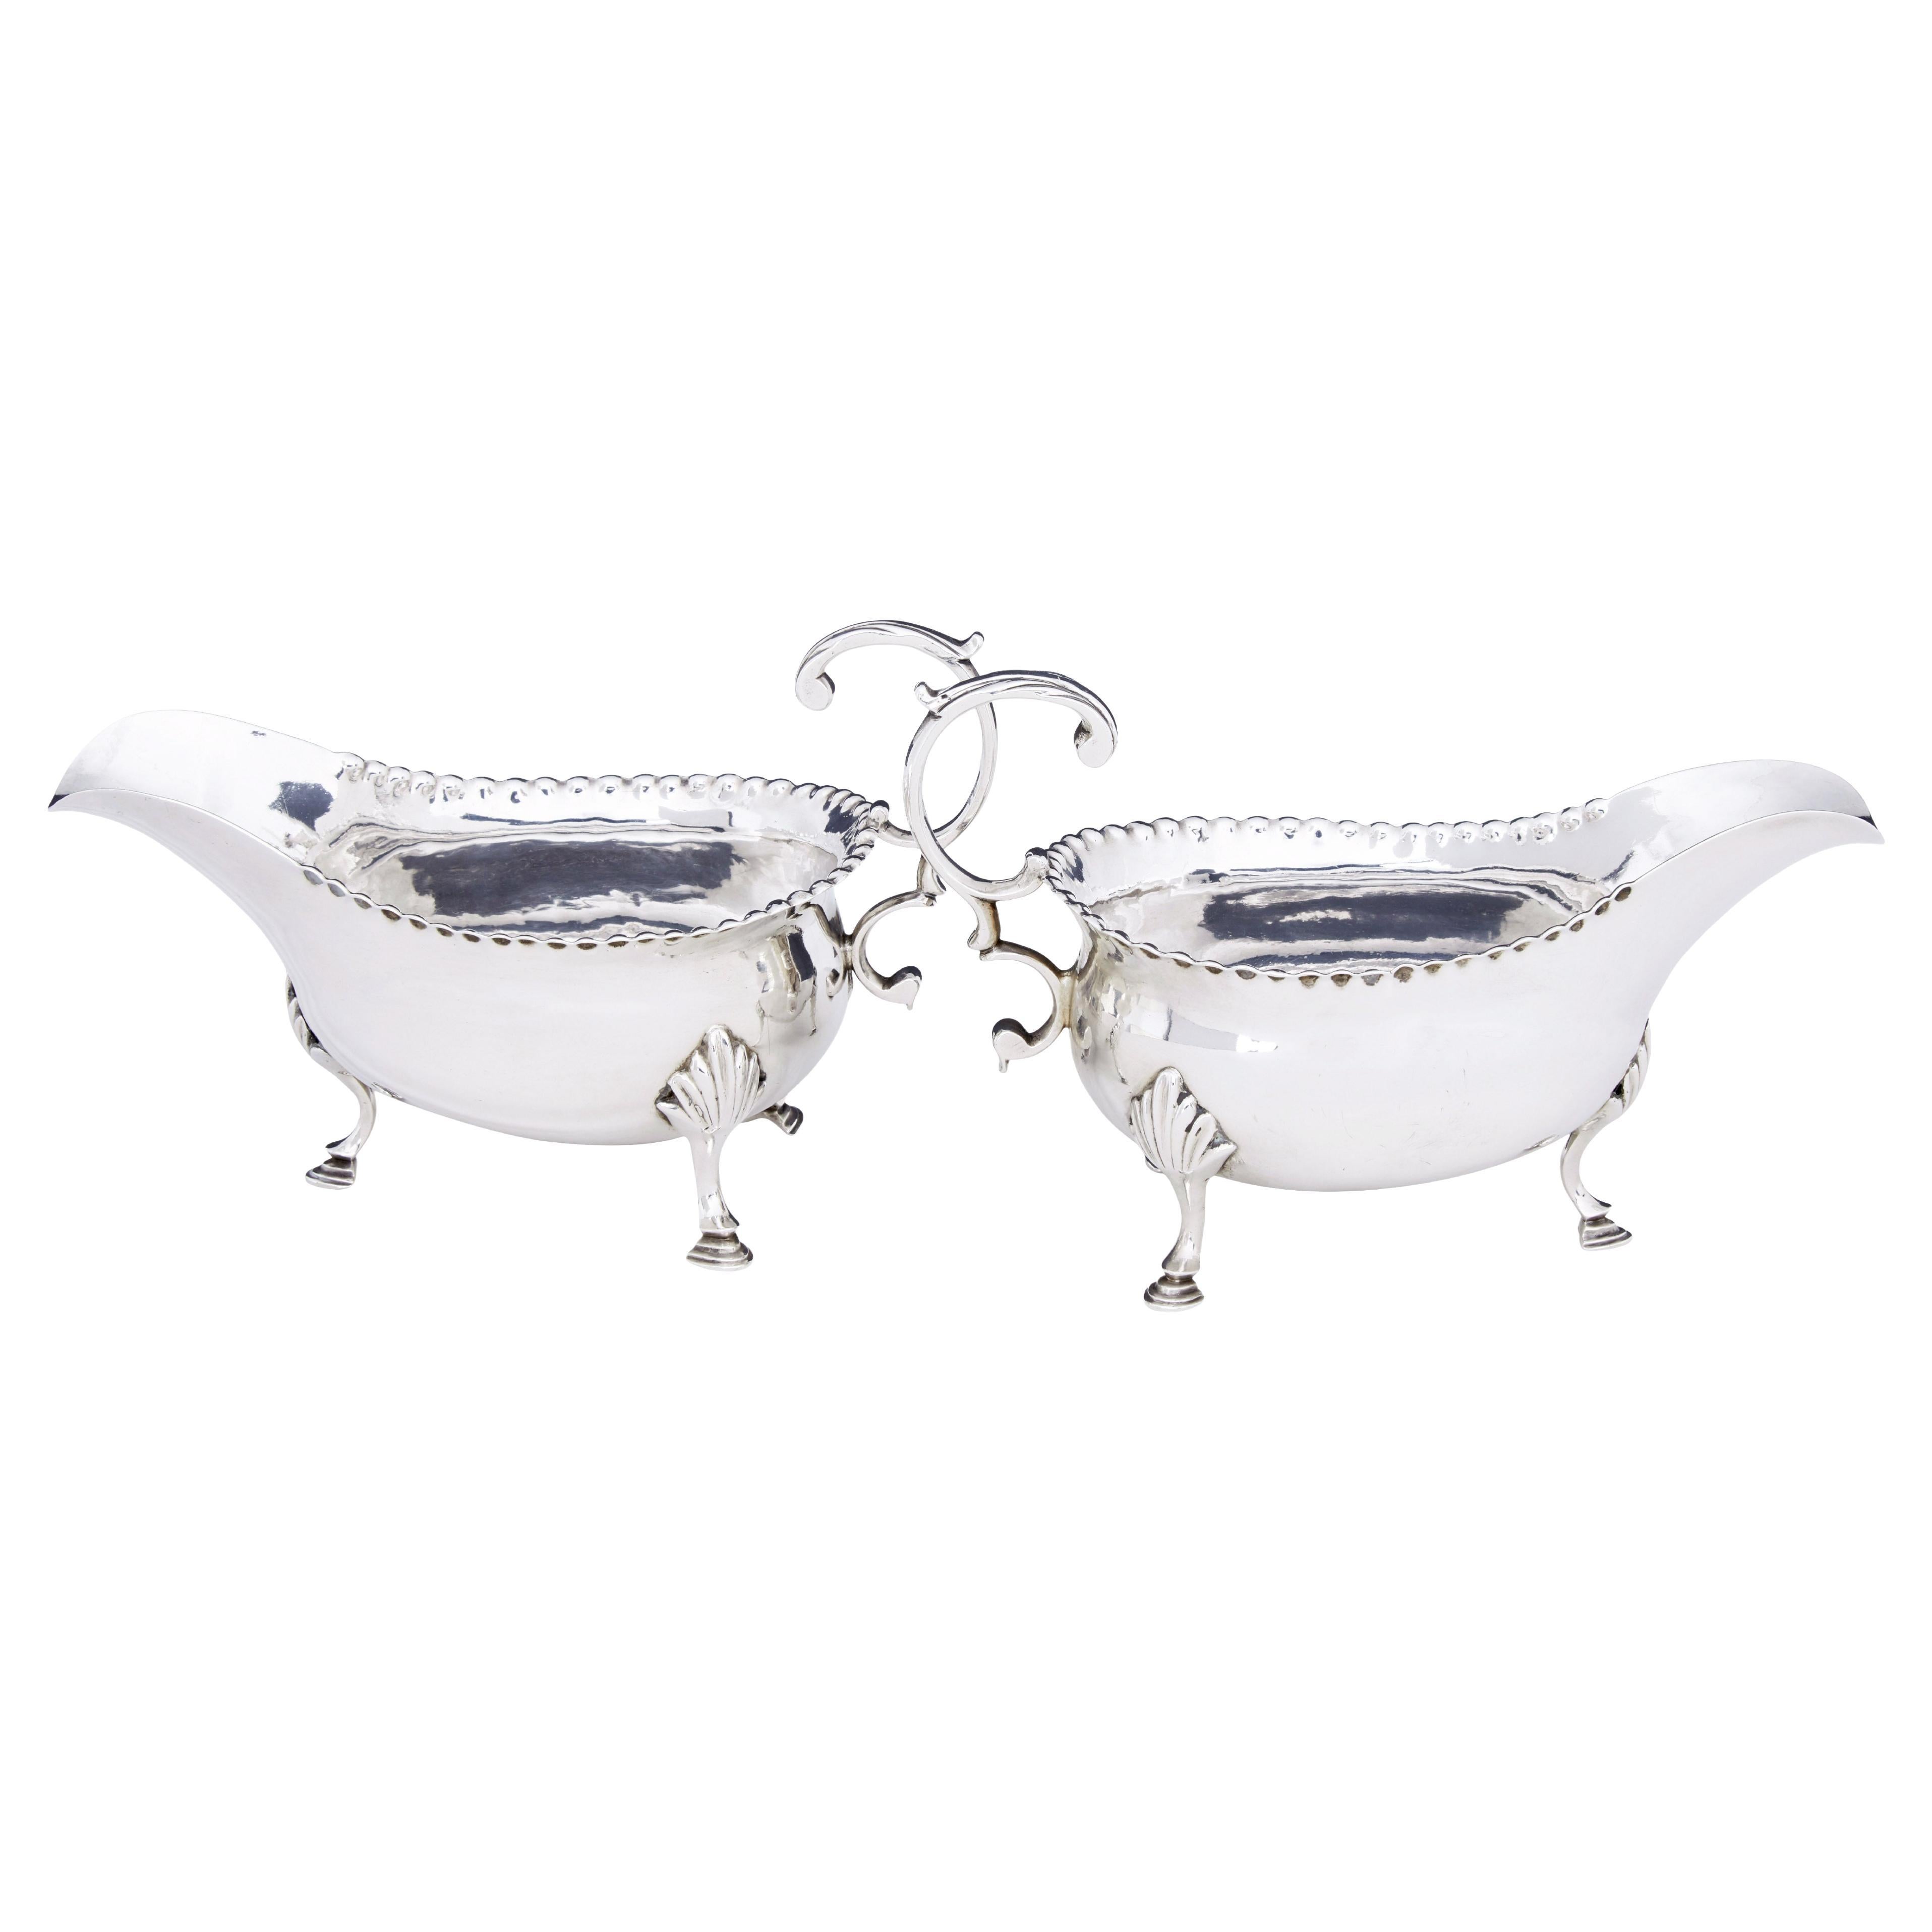 Pair of 18th century silver sauce boats by Hester Bateman